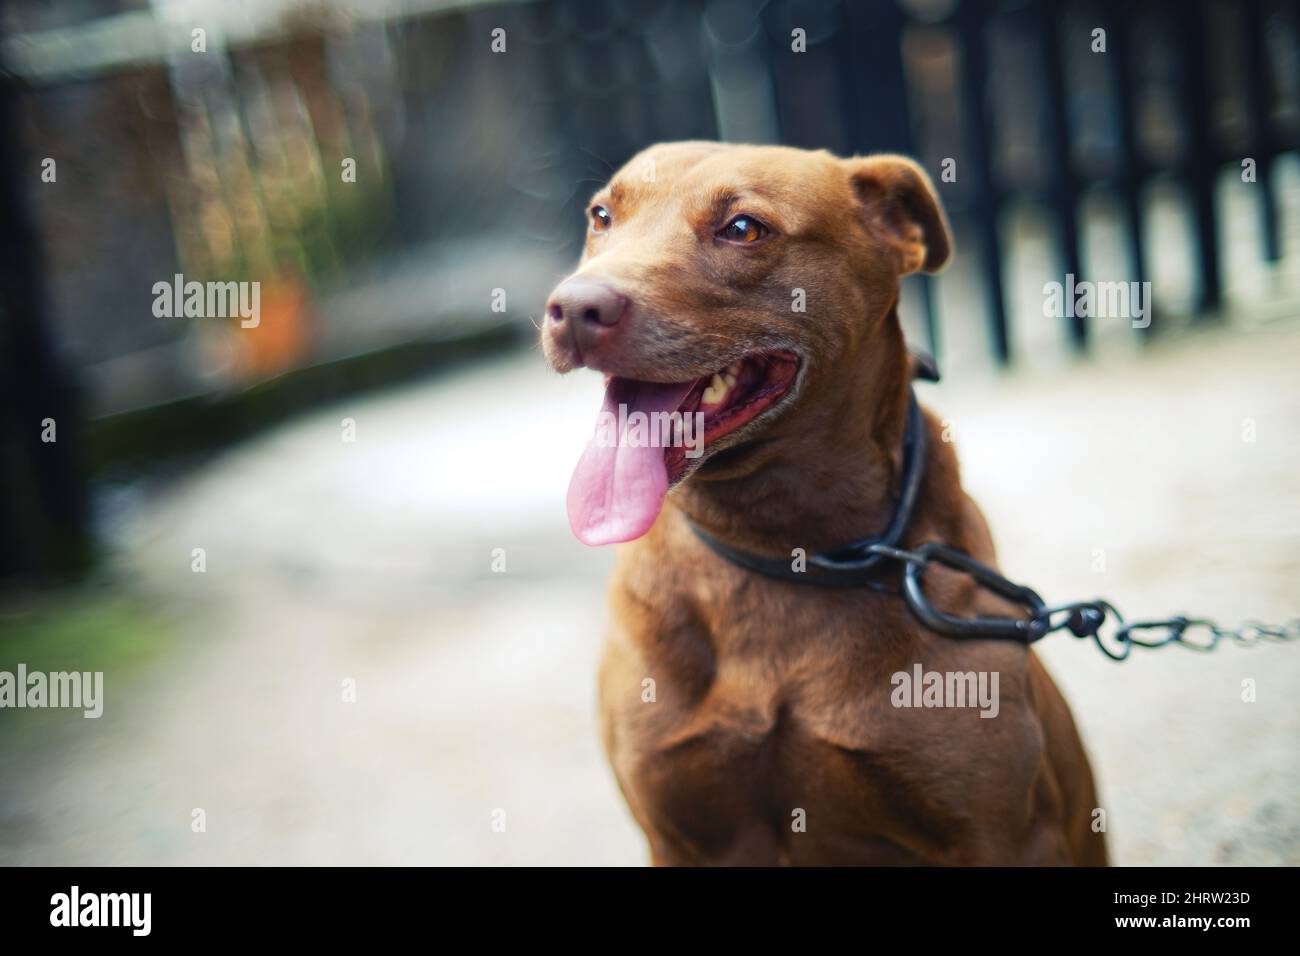 Shallow focus shot of an American Pit Bull Terrier dog tied with a chain Stock Photo